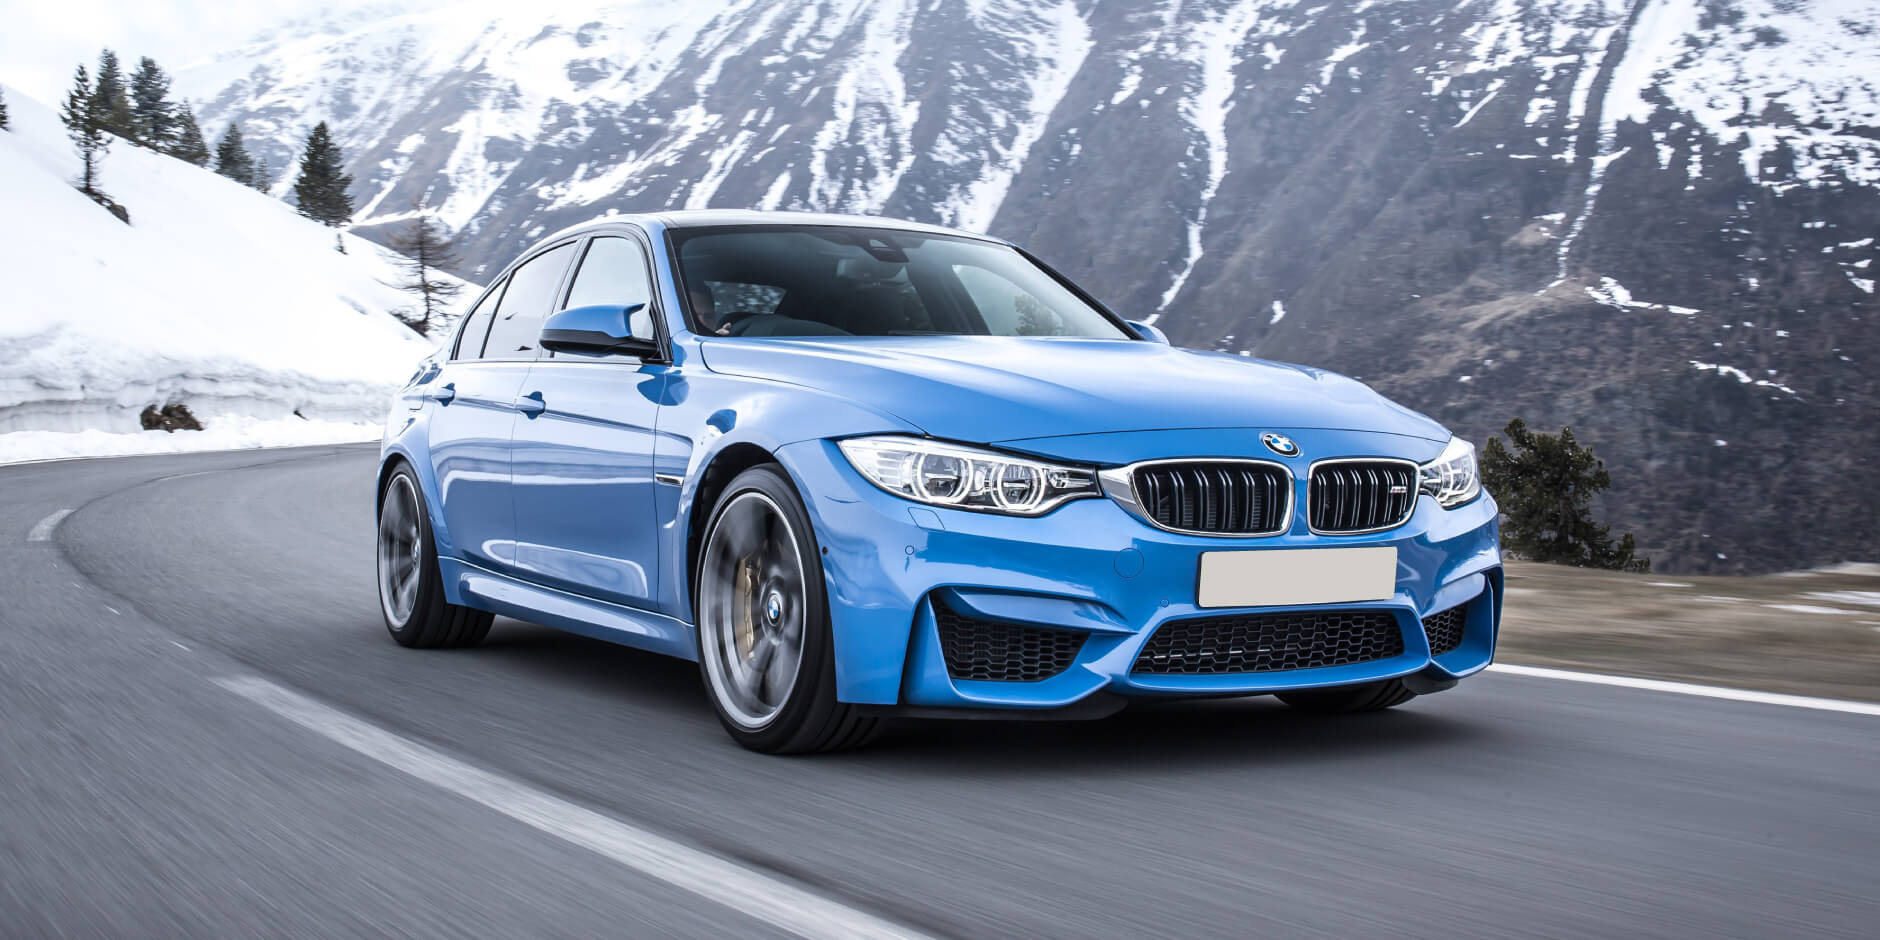 Maintaining Your BMW Sports Car: Essential Tips for UK Owners